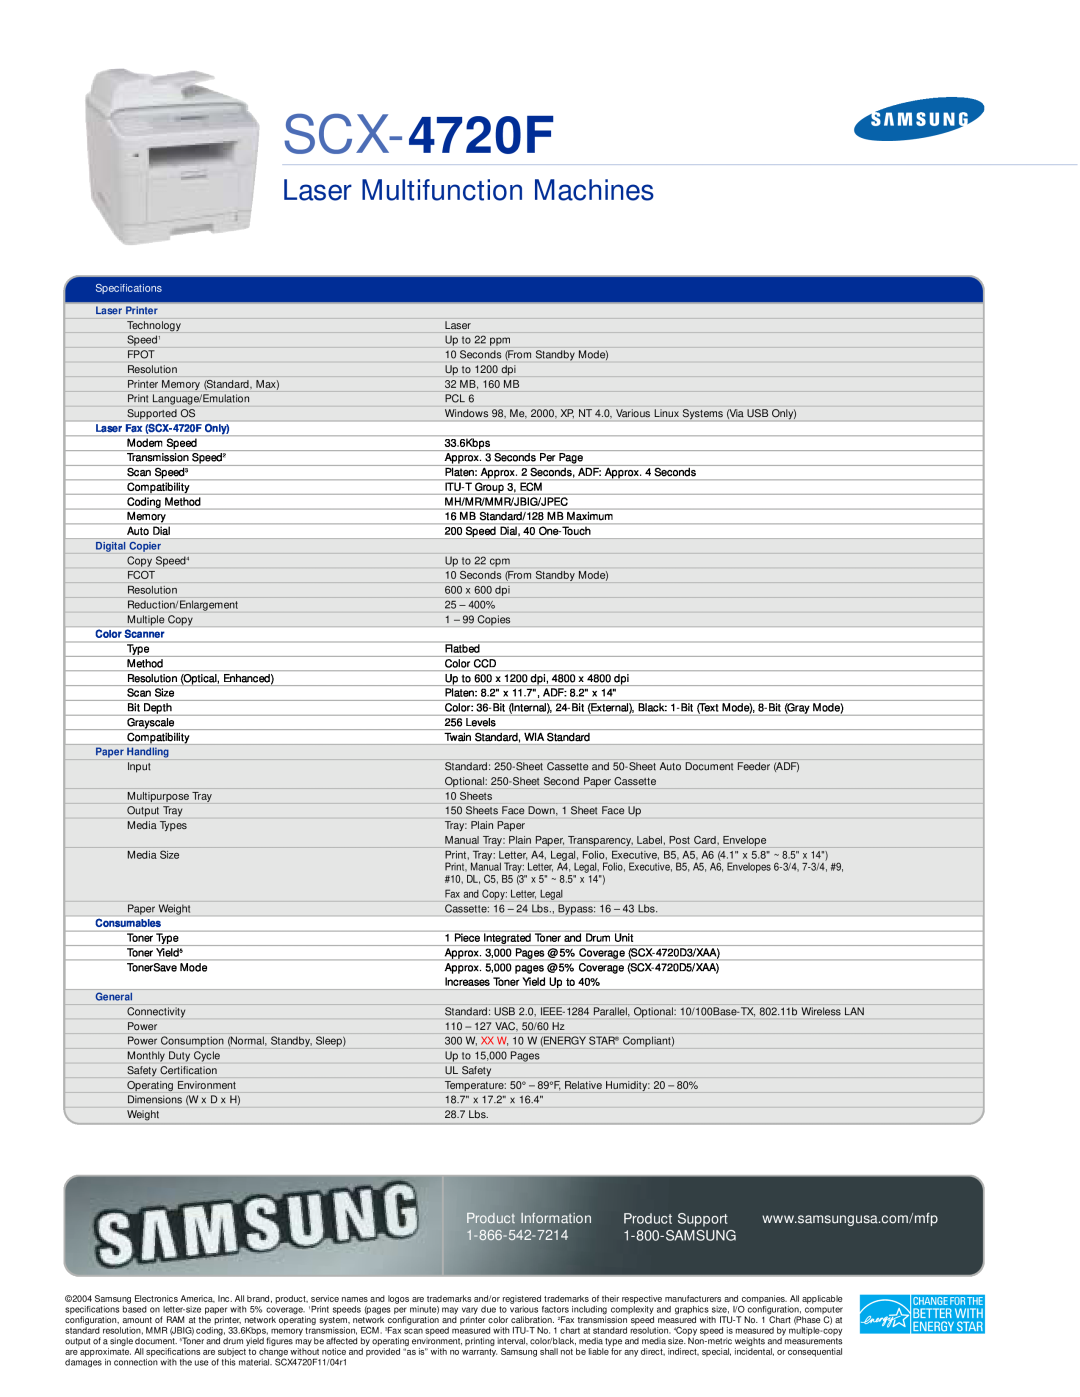 Samsung SCX-4720F Laser Multifunction Machines, Product Information, Product Support, Samsung, Specifications, Consumables 